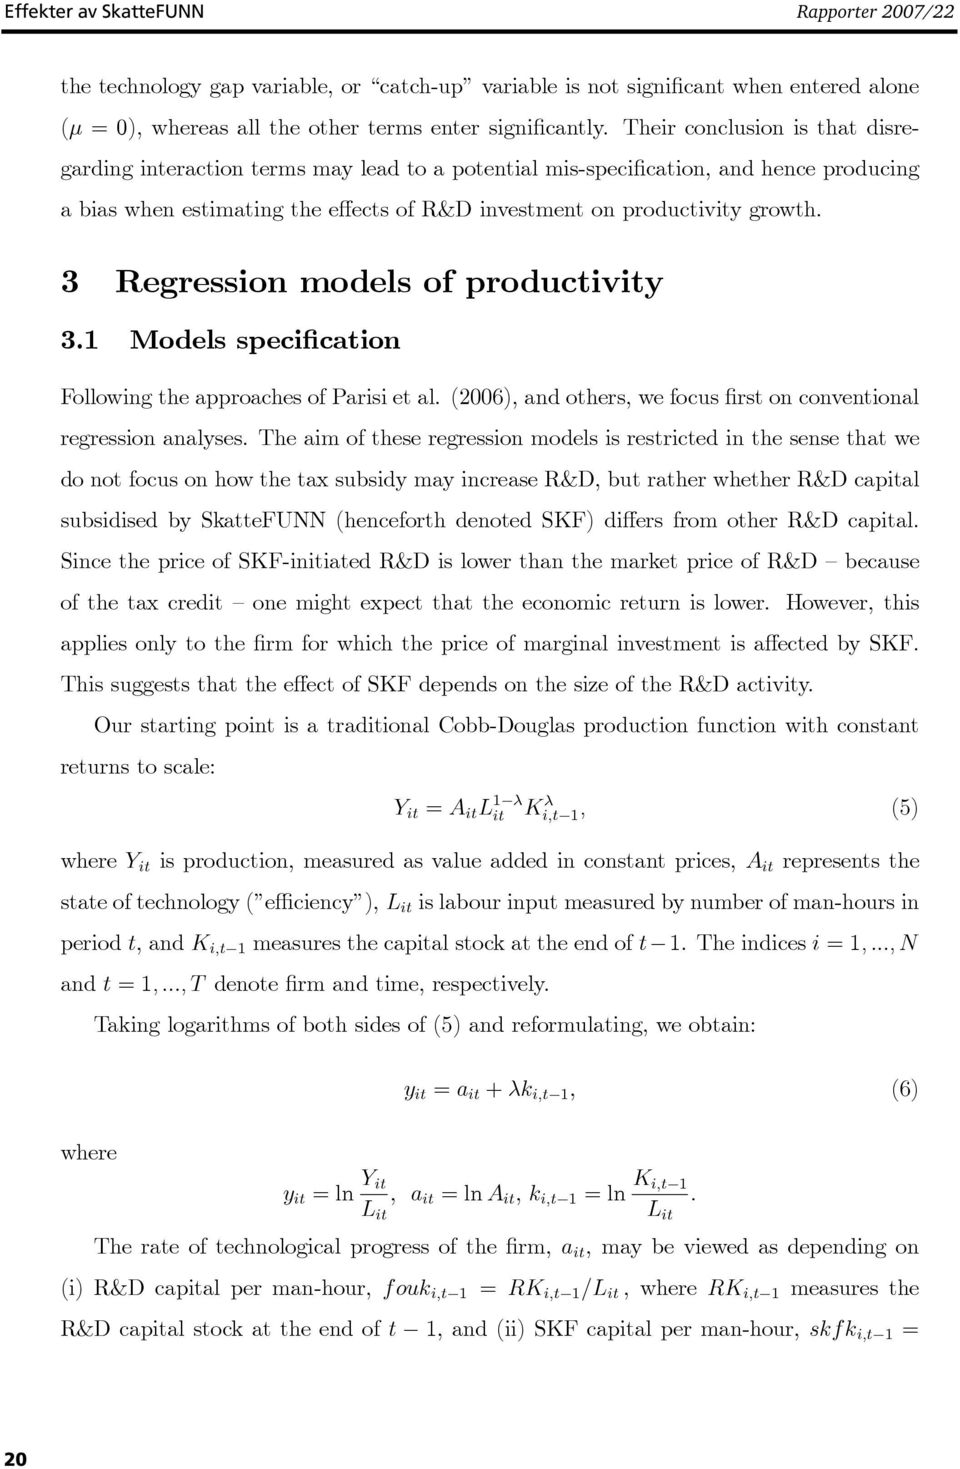 3 Regression models of productivity 3.1 Models specification Following the approaches of Parisi et al. (2006), and others, we focus first on conventional regression analyses.